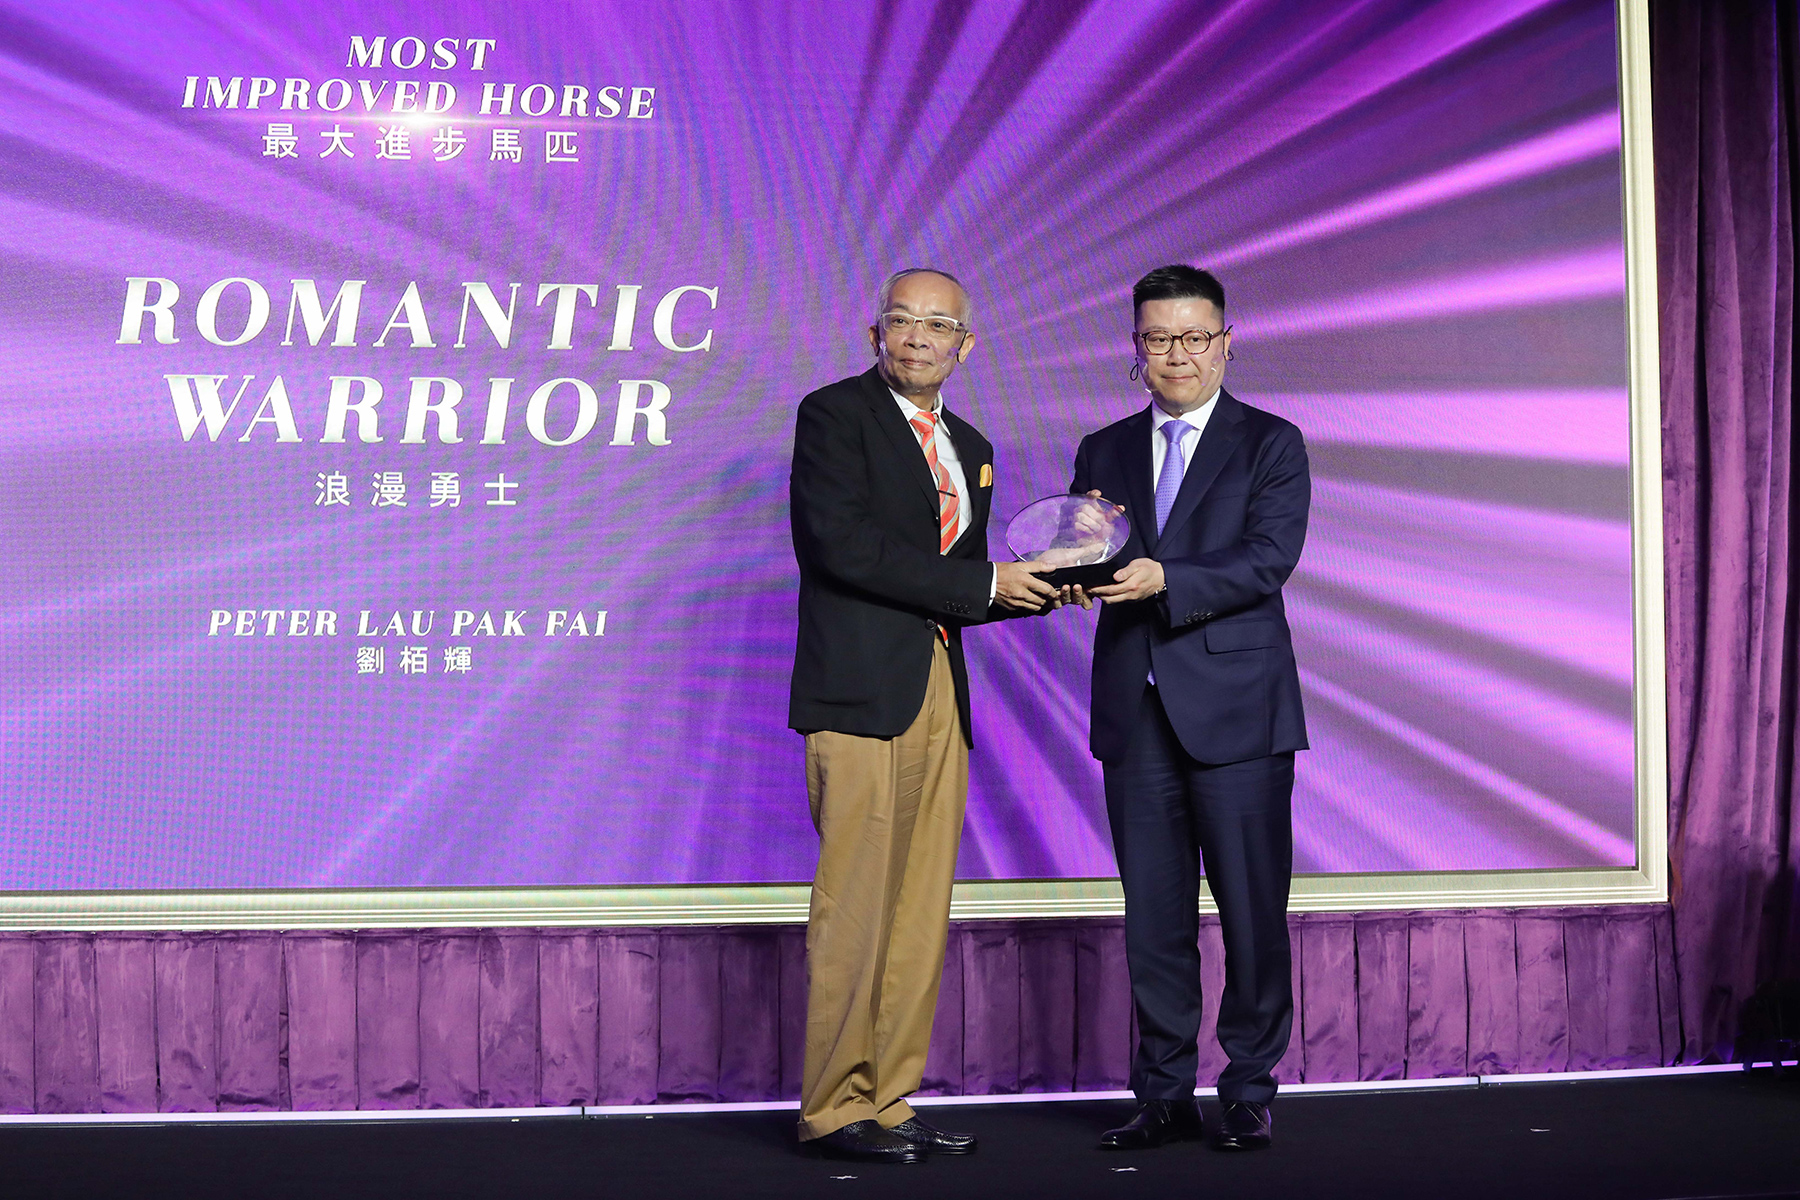 Mr Matthew Lam, President of the Hong Kong Racehorse Owners Association, presents the Most Improved Horse trophy to Mr Peter Lau Pak Fai, owner of Romantic Warrior.